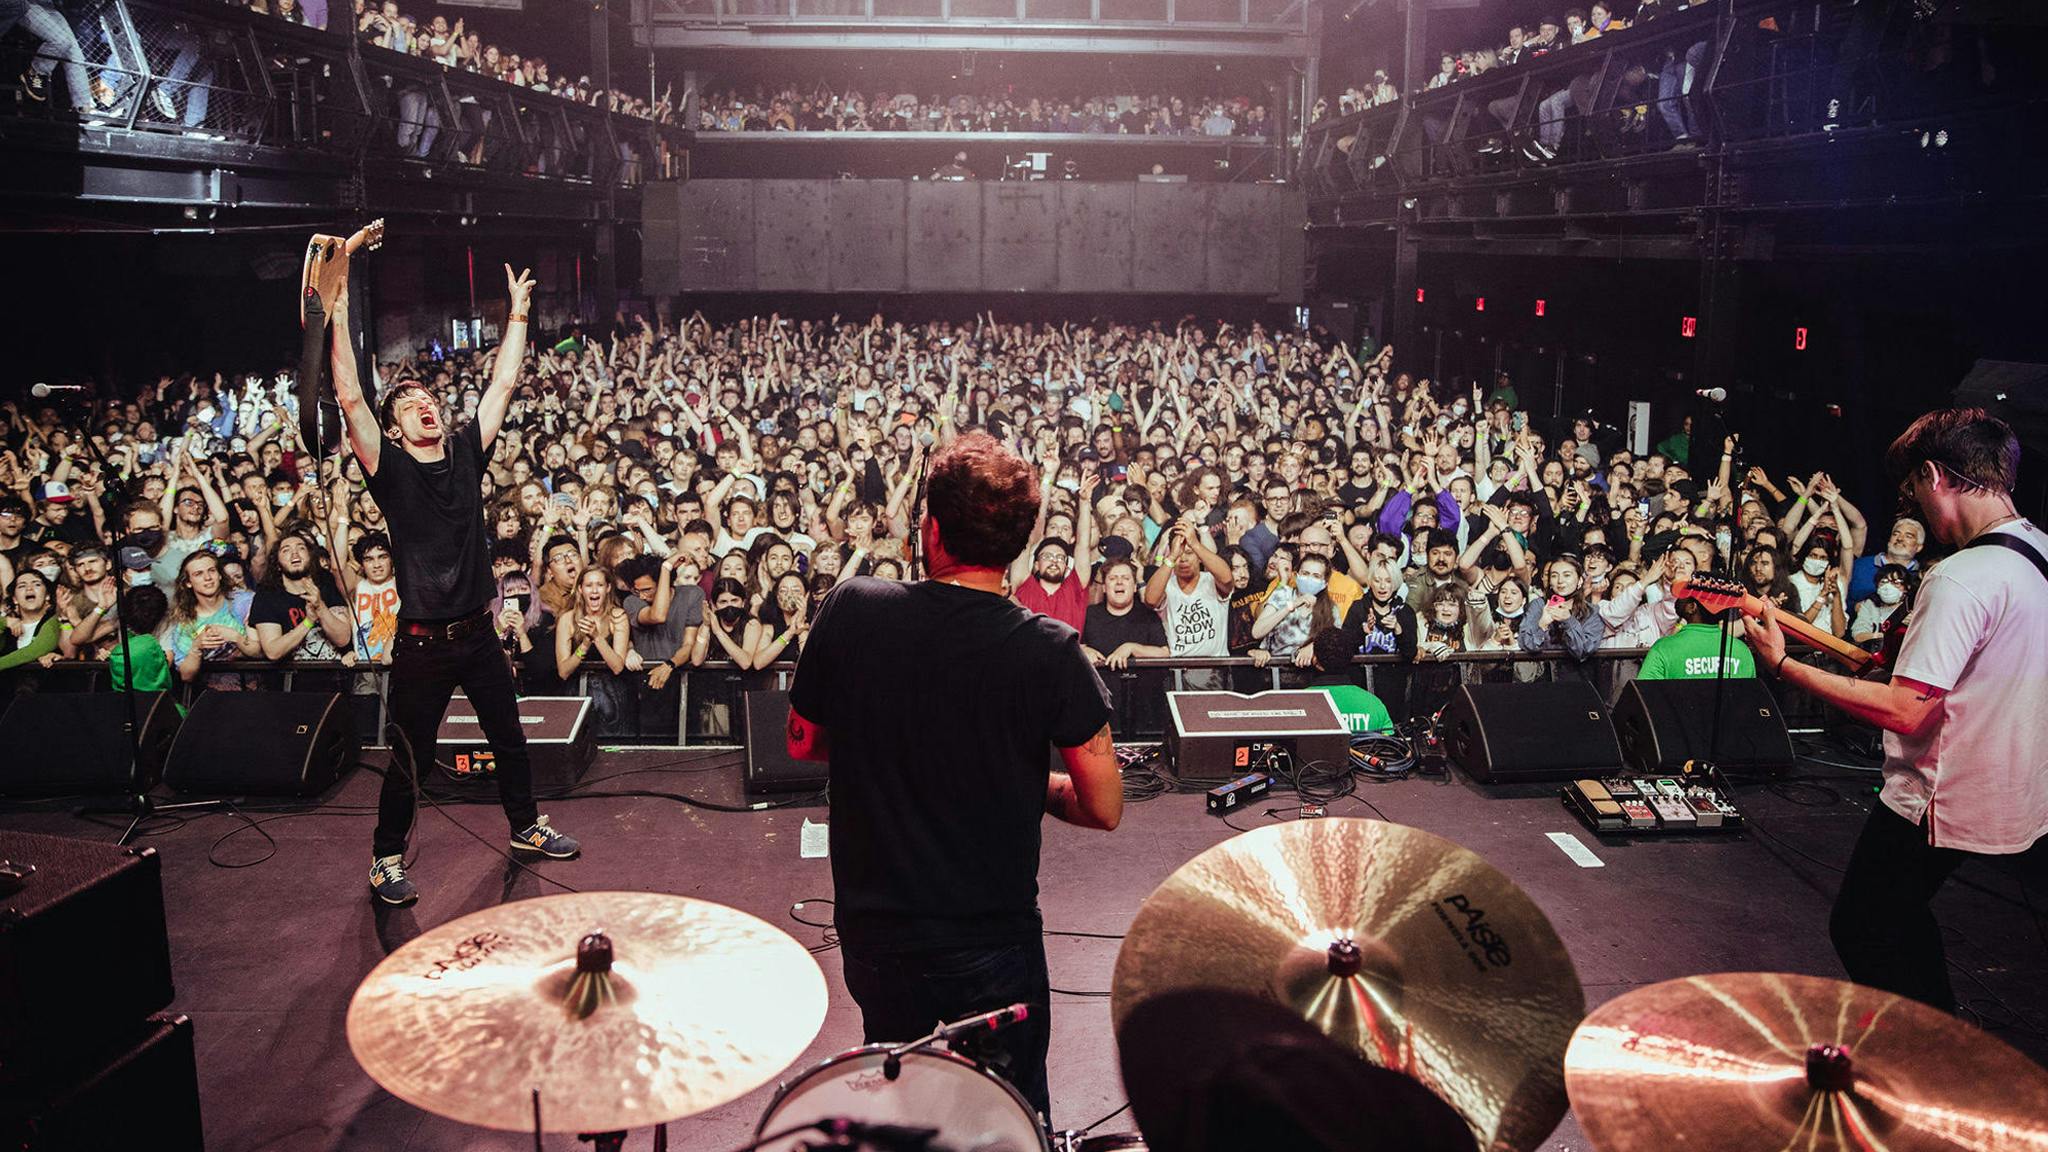 PUP share fan footage in live video for PUPTHEBAND Inc Is Filing For Bankruptcy